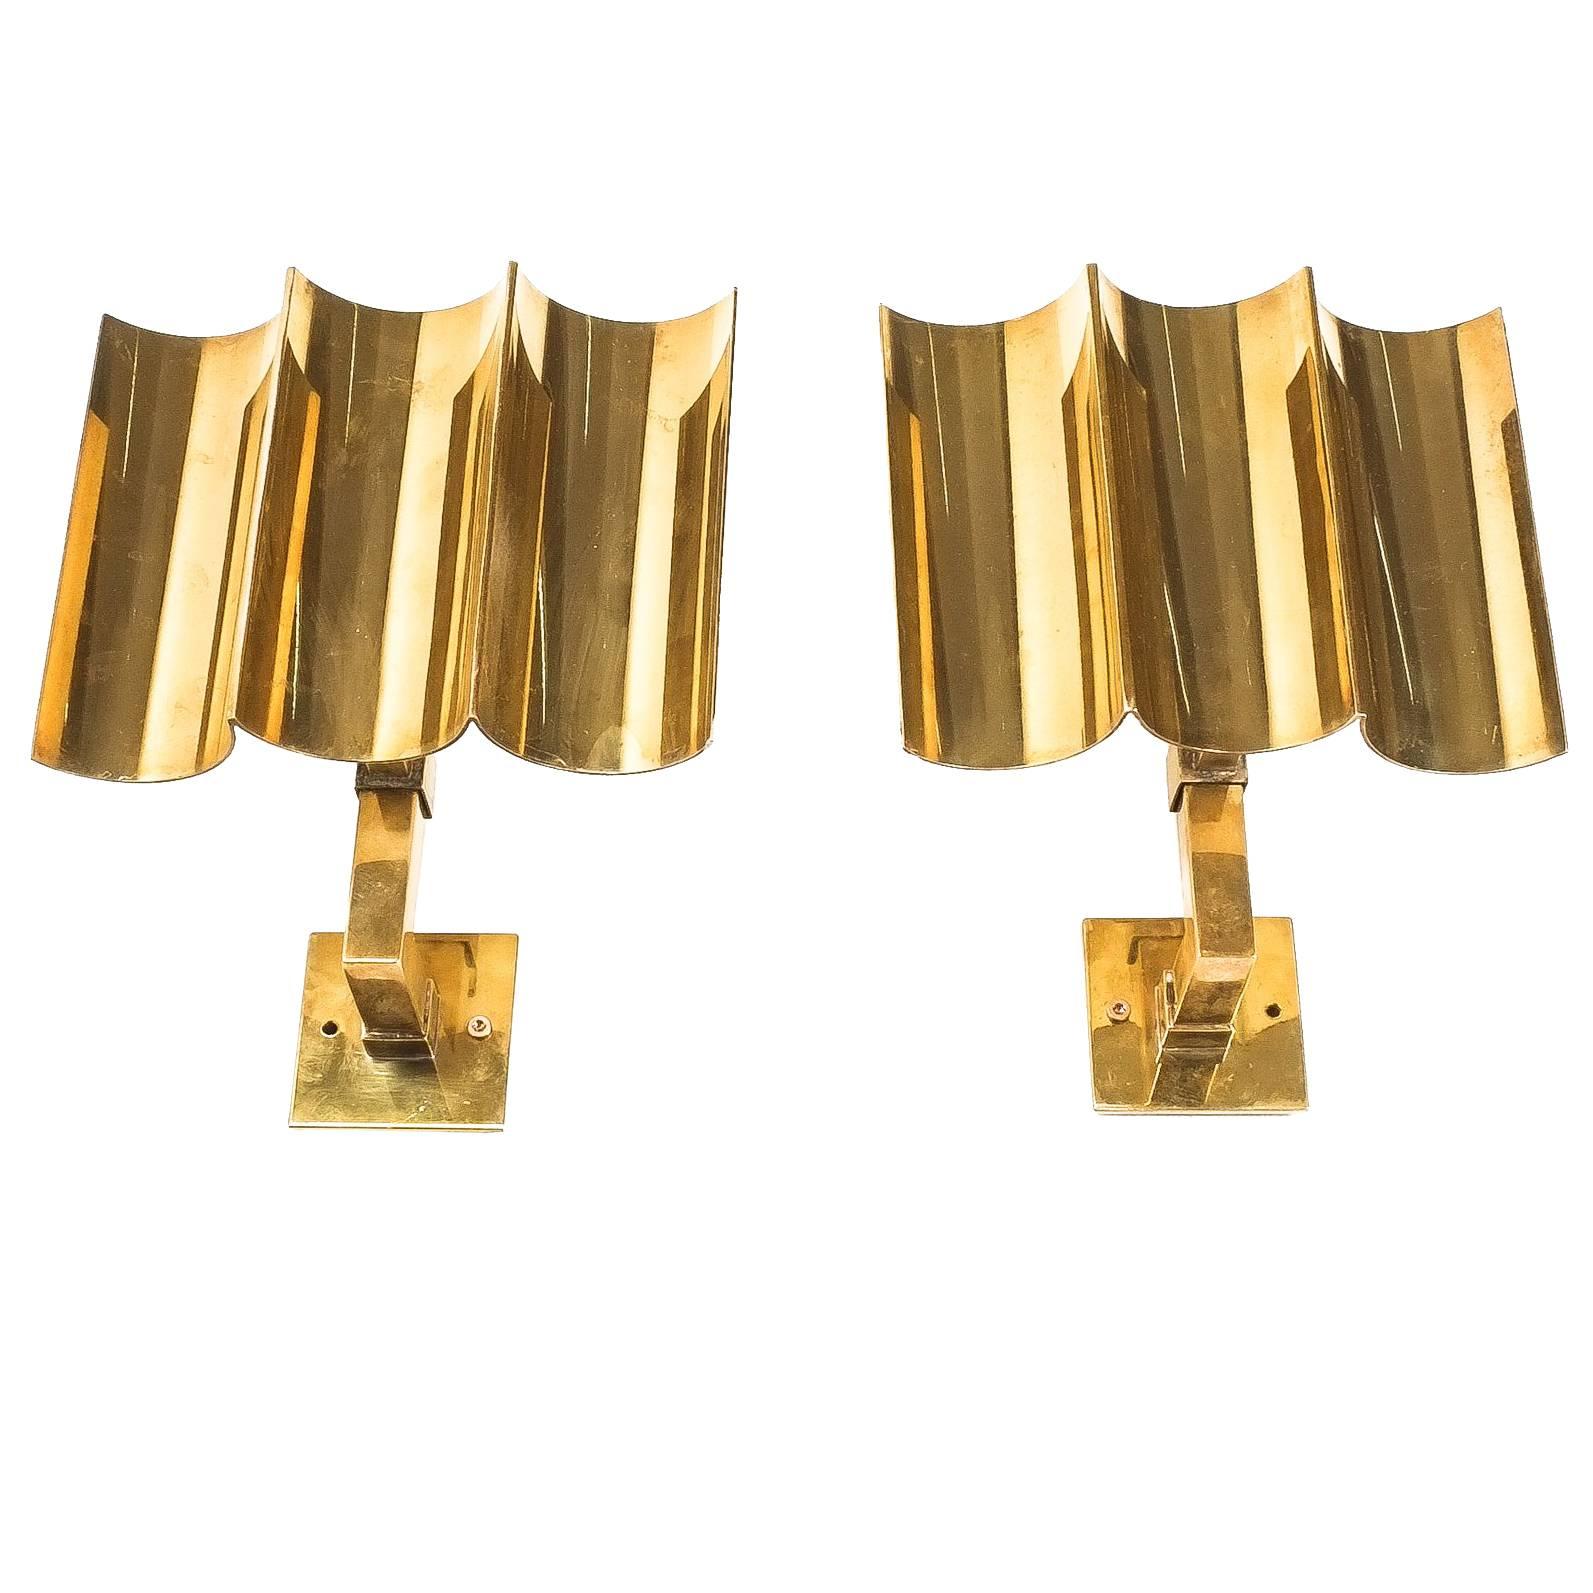 Artisan Solid Brass Wall Lamps Sconces Art Deco Style, France, 1950